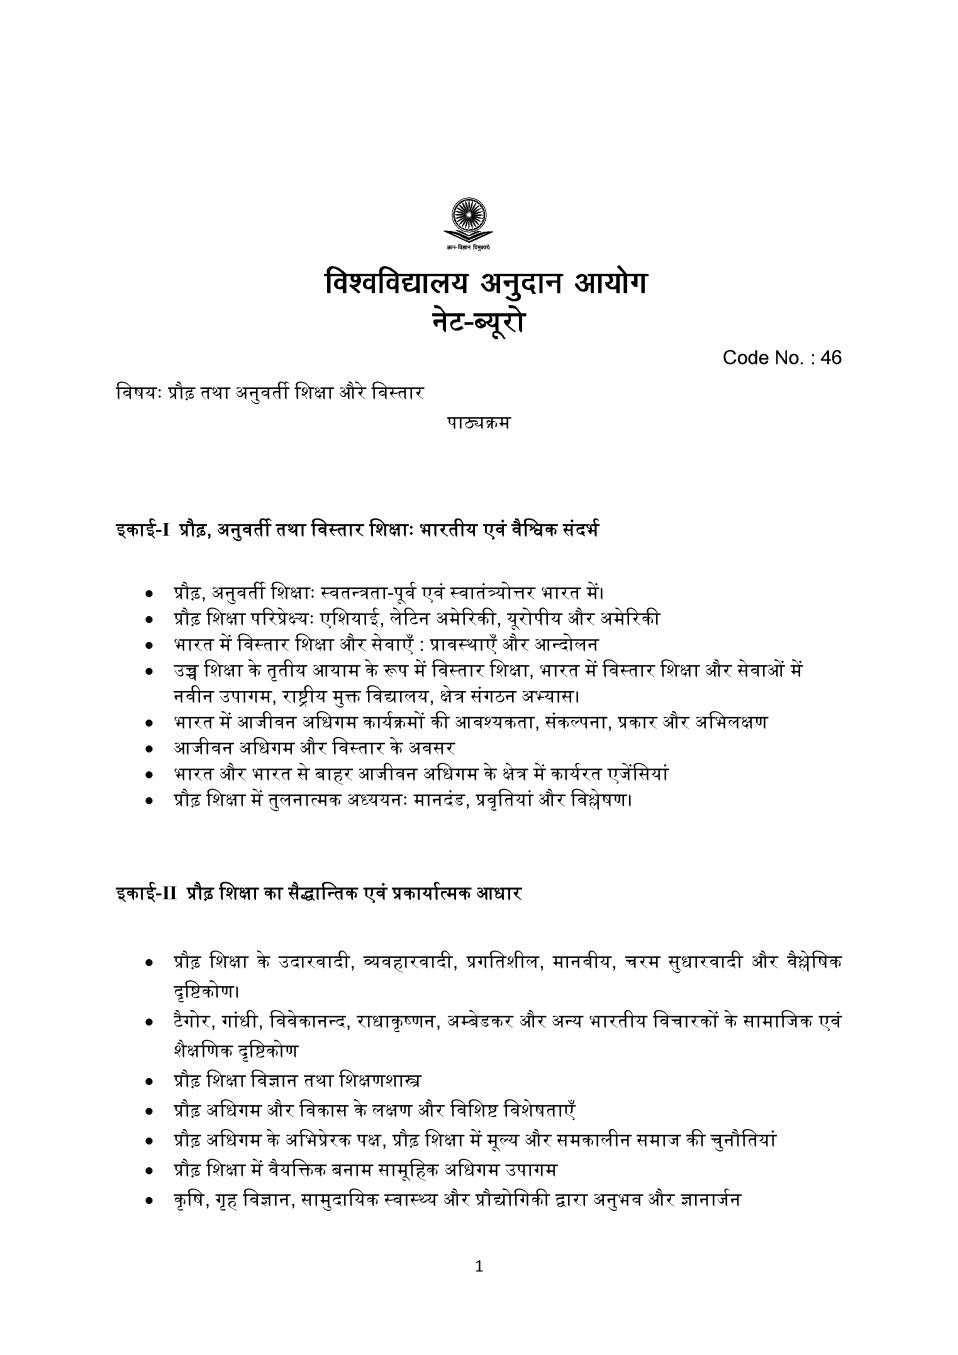 UGC NET Syllabus for Adult Education 2020 in Hindi - Page 1